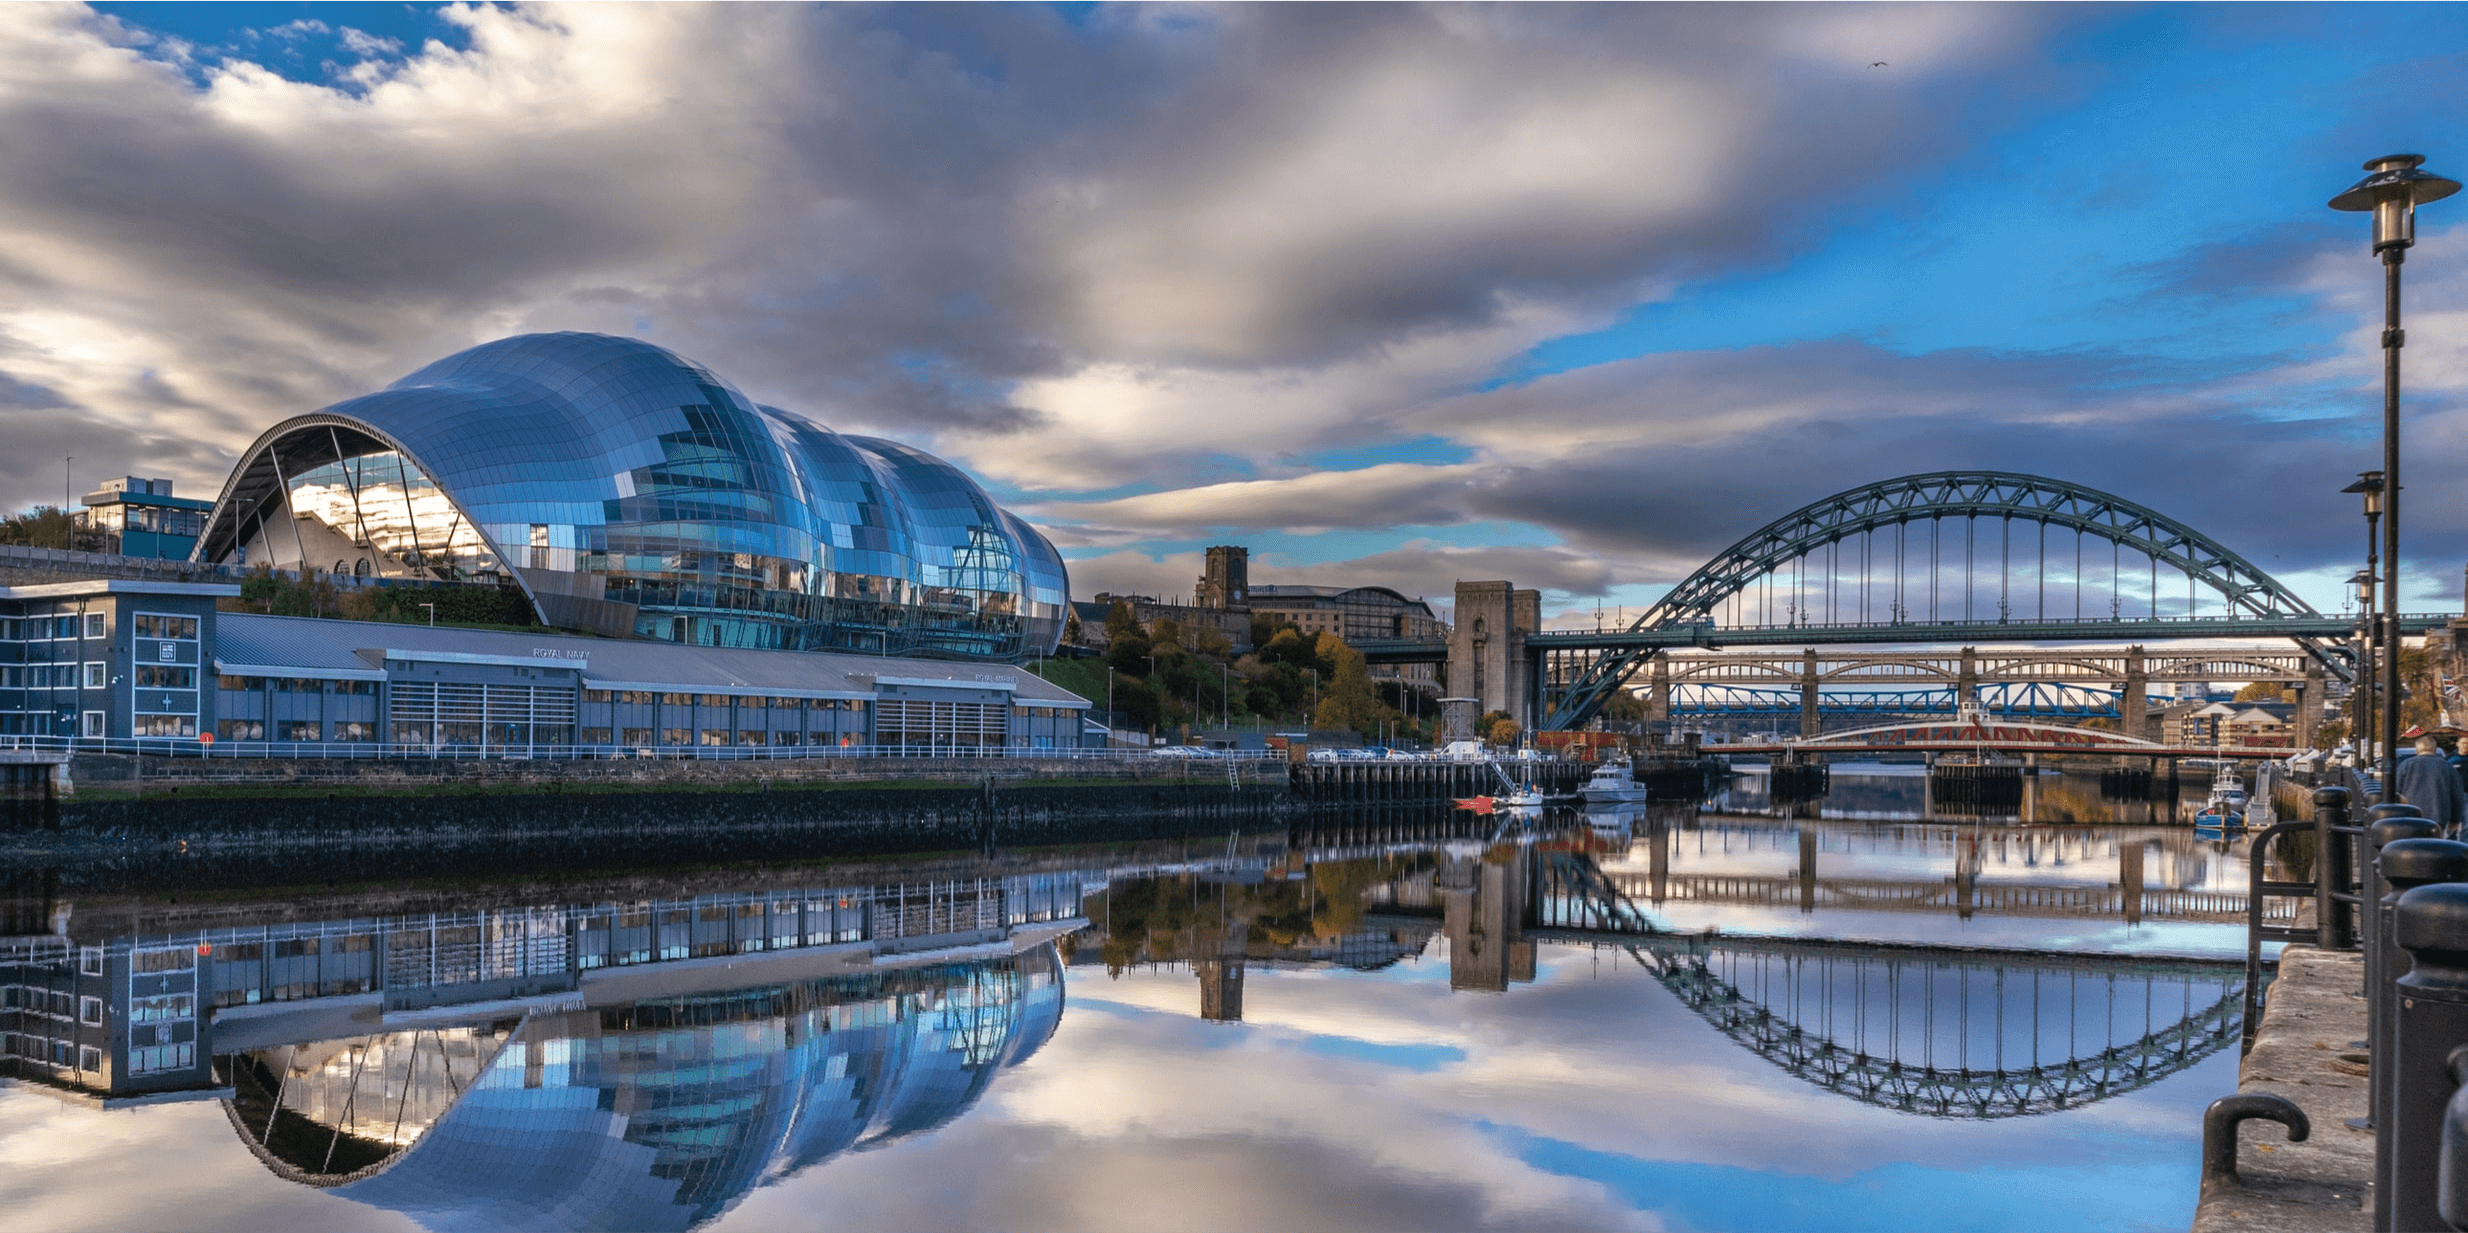 An image overlooking the sage and tyne bridge from across the water in Newcastle